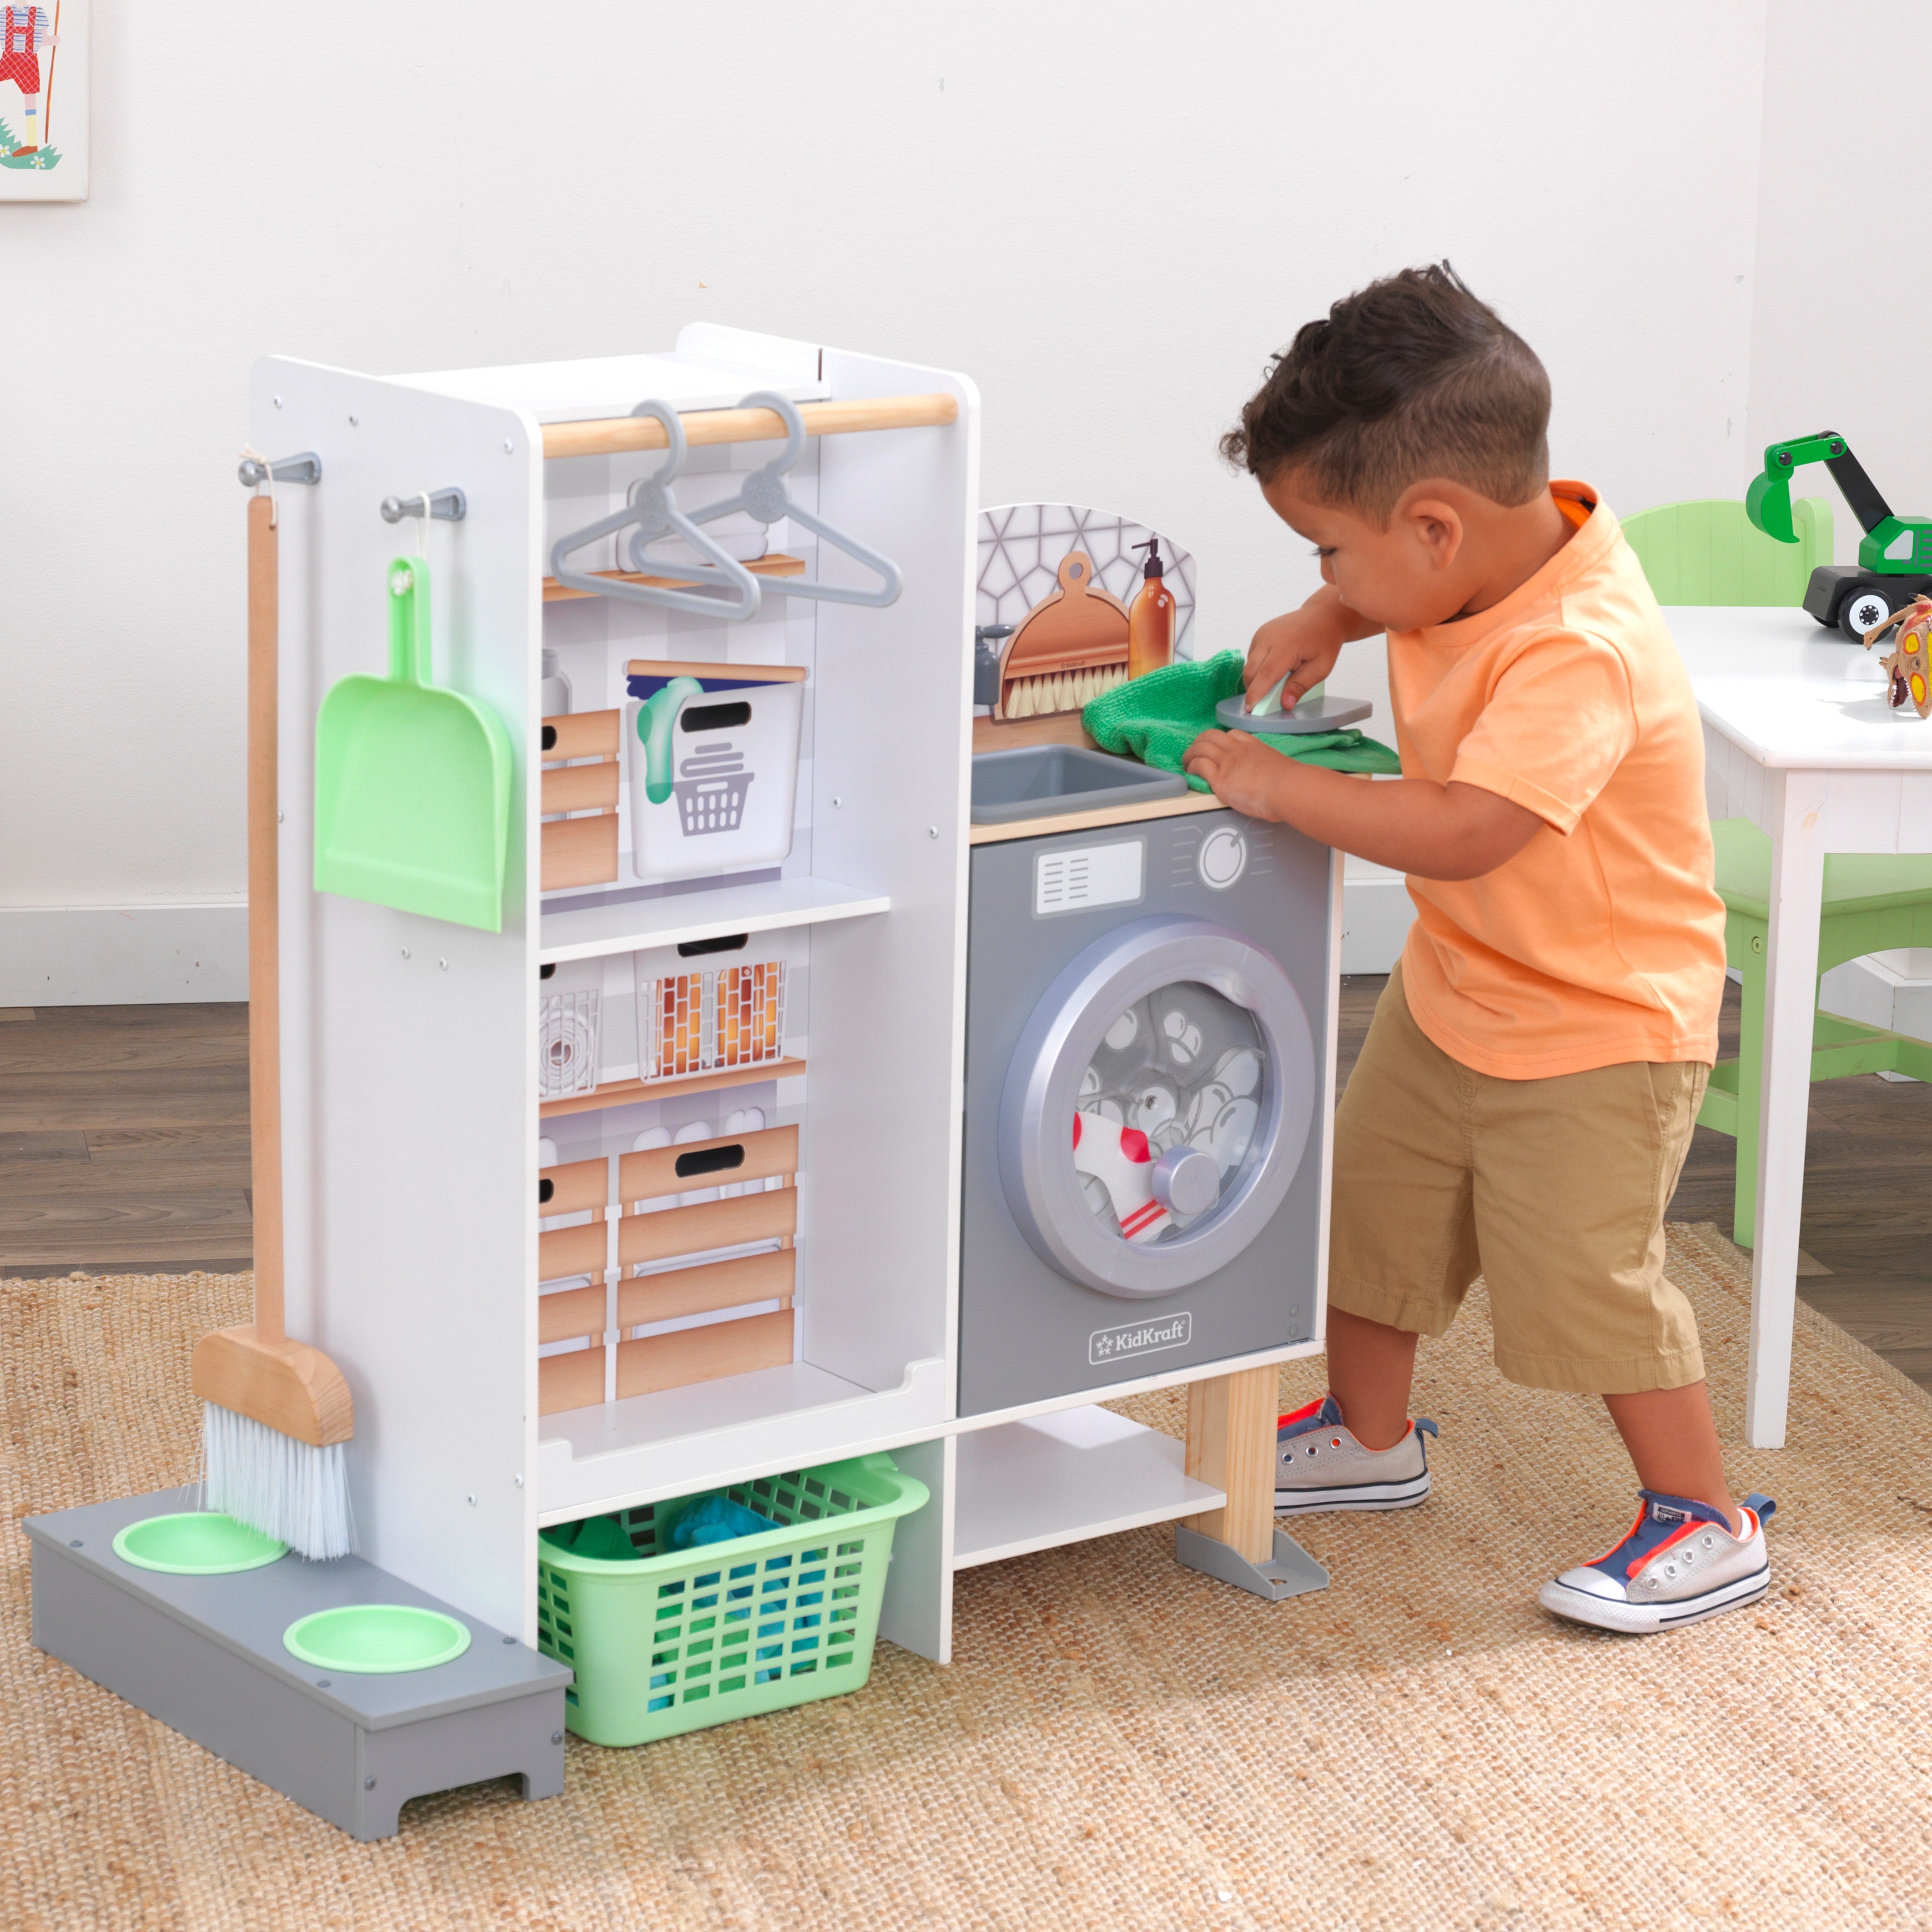 Kid playing with KidKraft washer and kitchen set